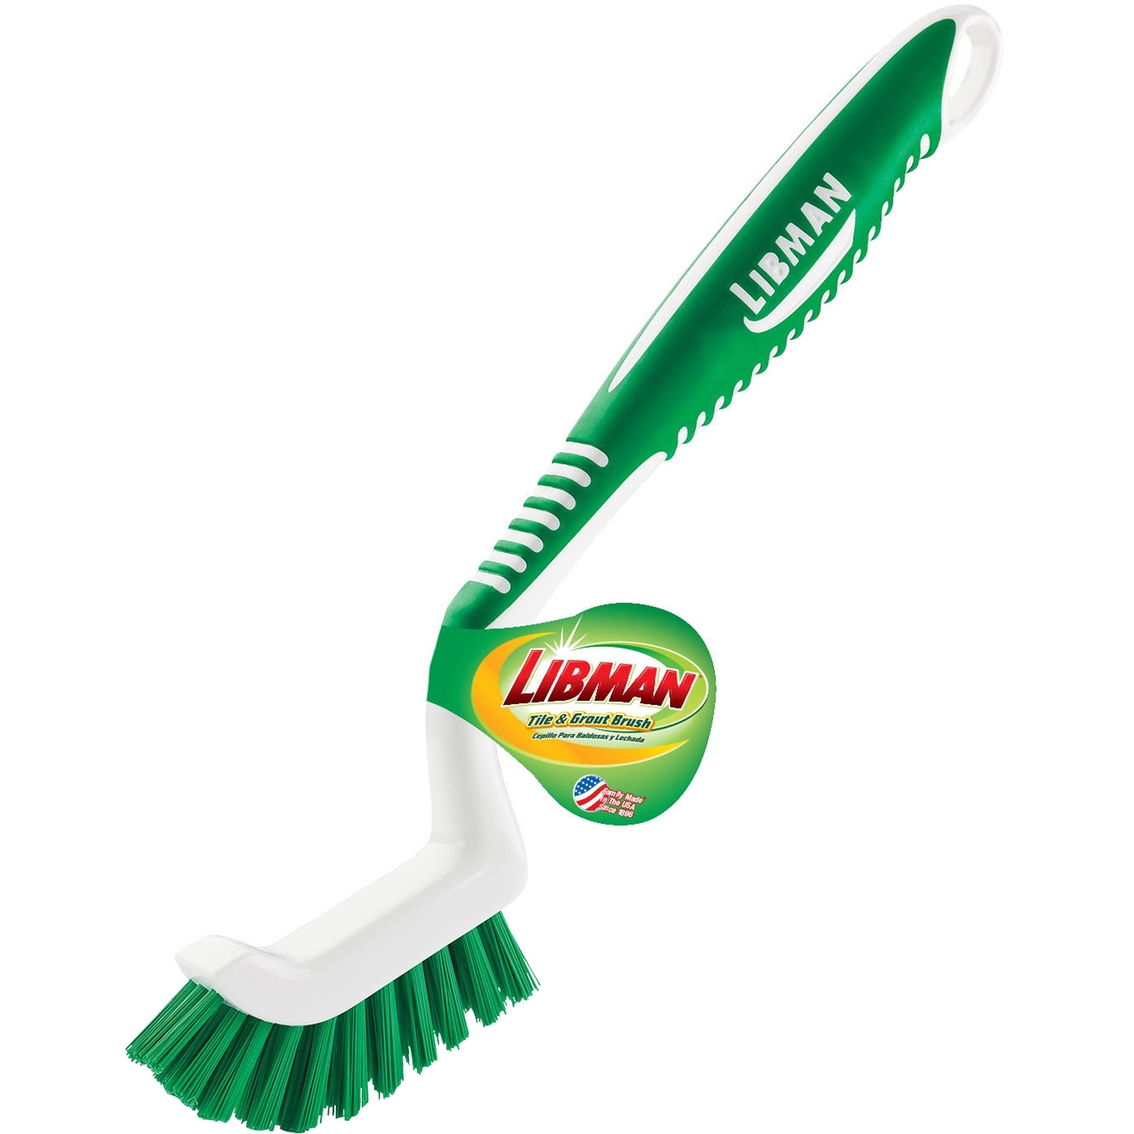 Libman Tile & Grout Brush - Image 2 of 2